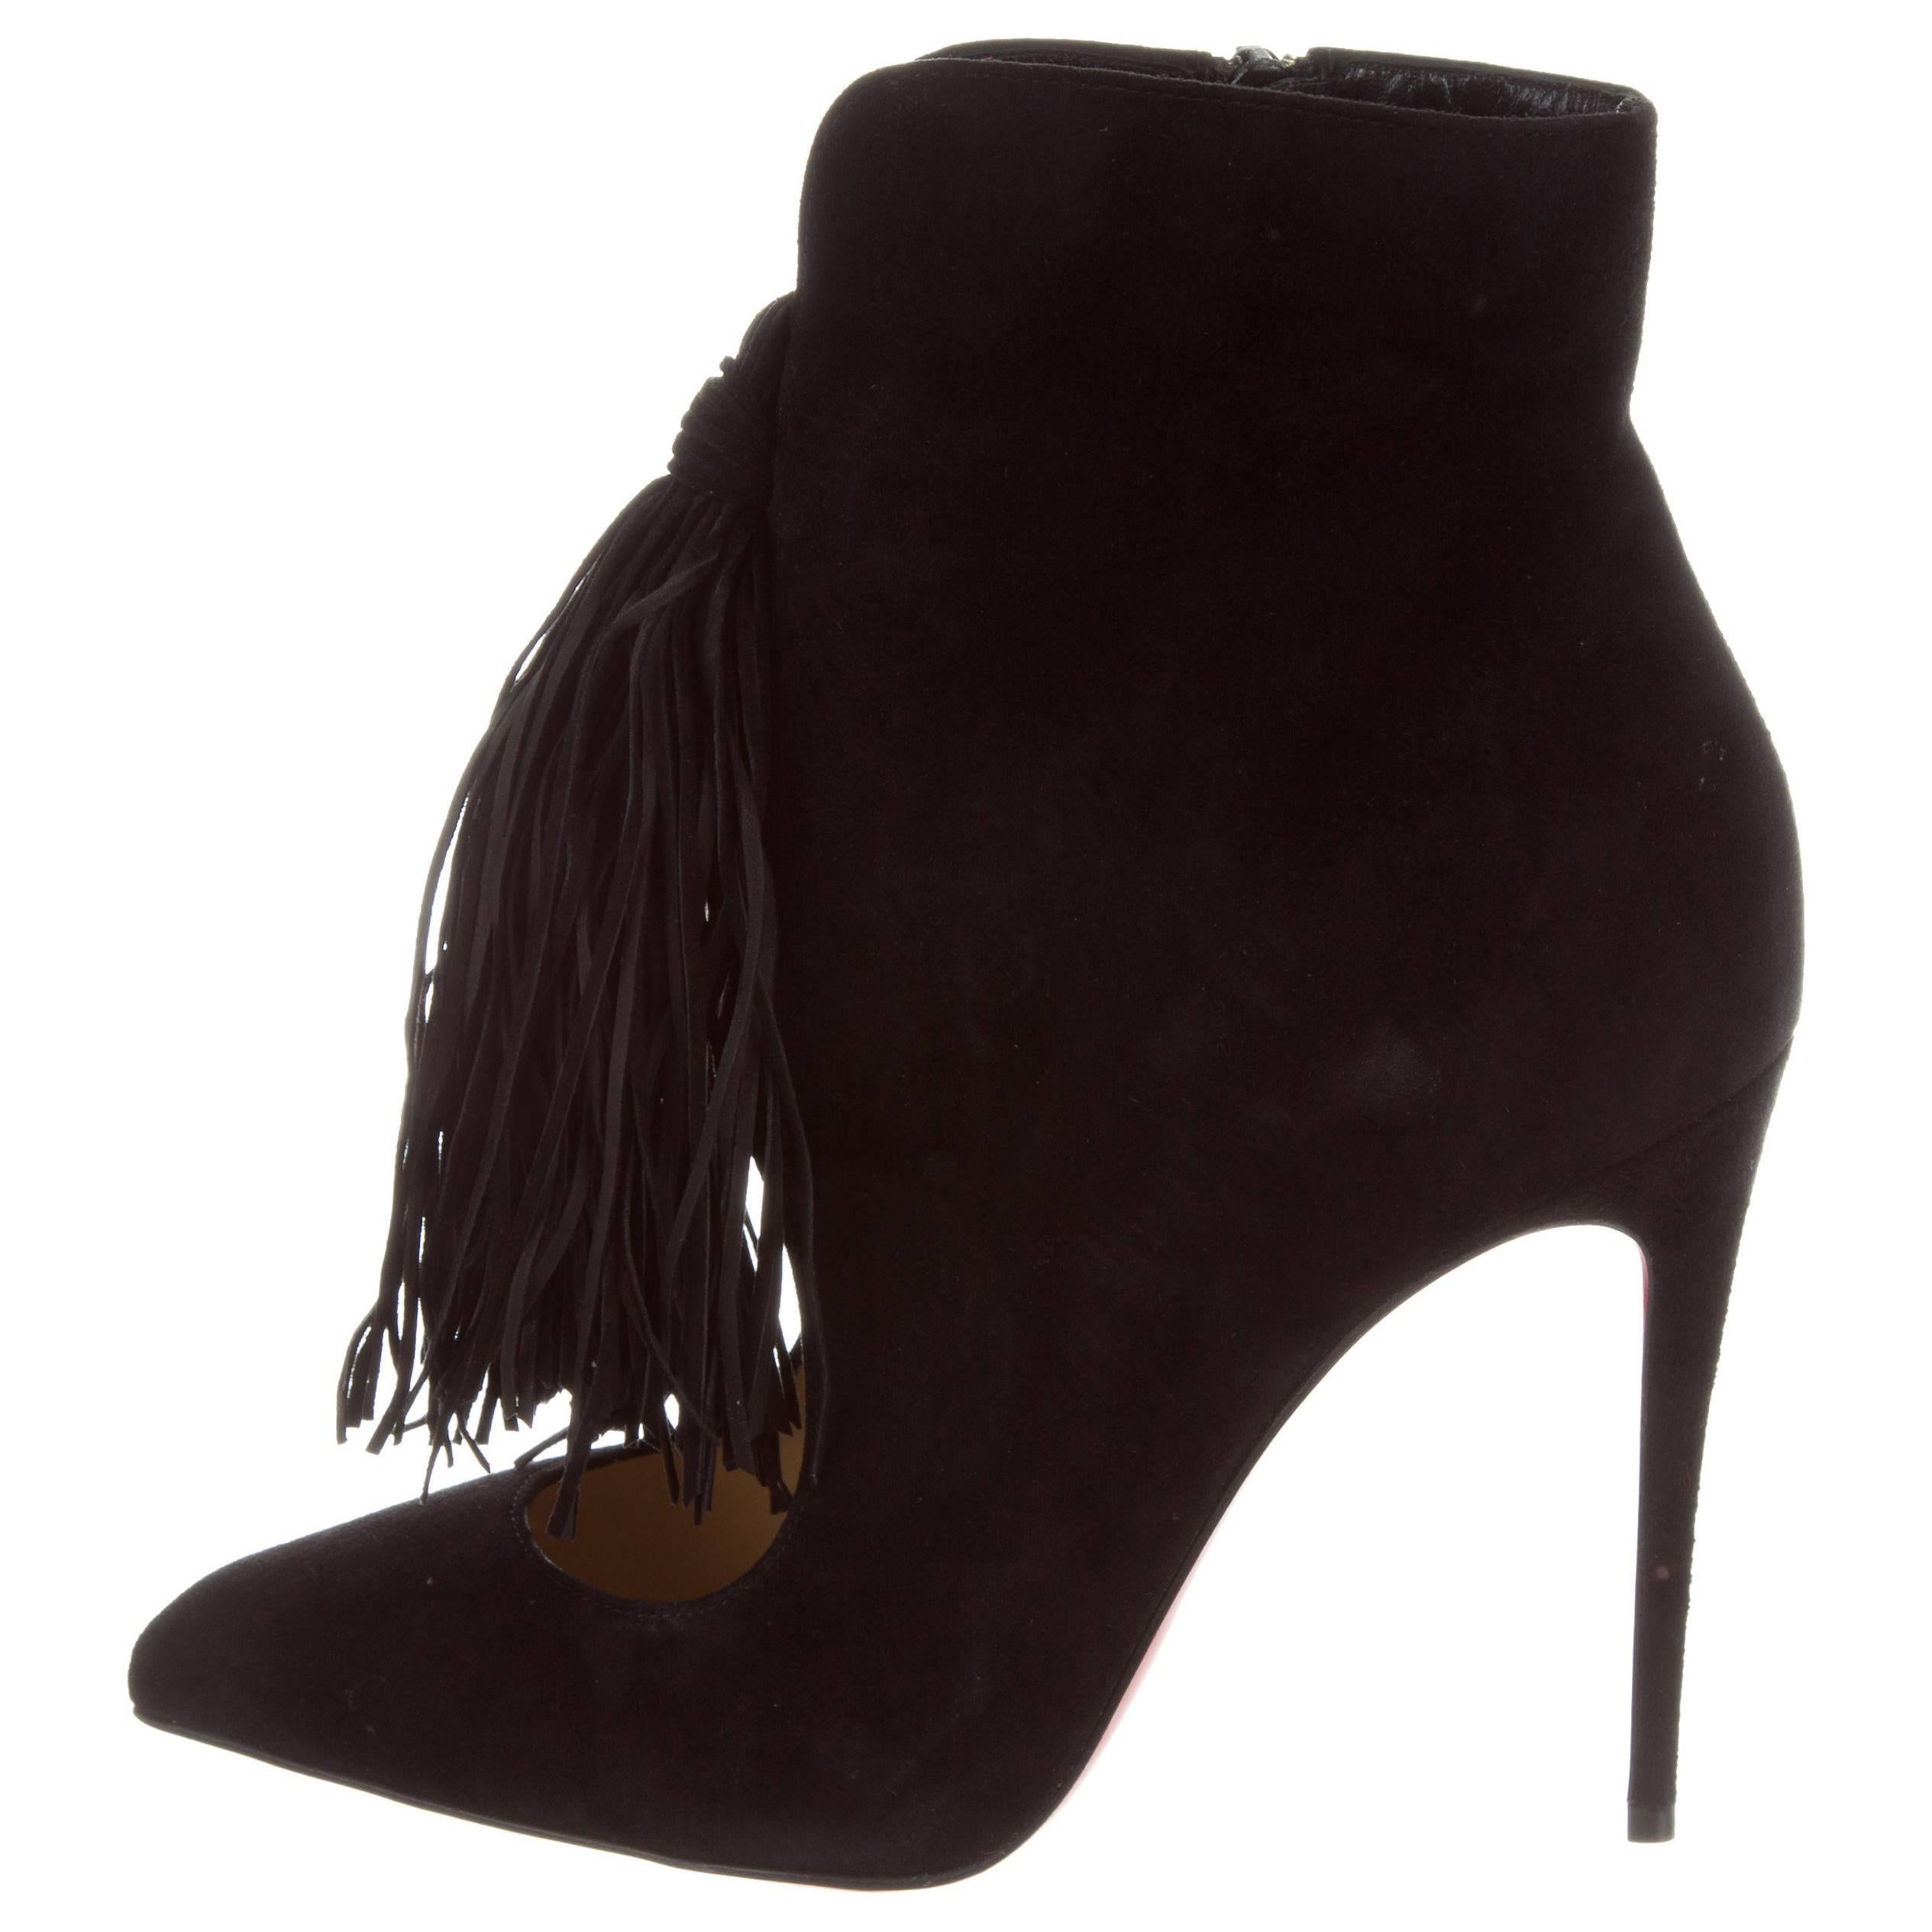 Christian Louboutin New Black Suede Fringe Evening Ankle Booties Boots in Box